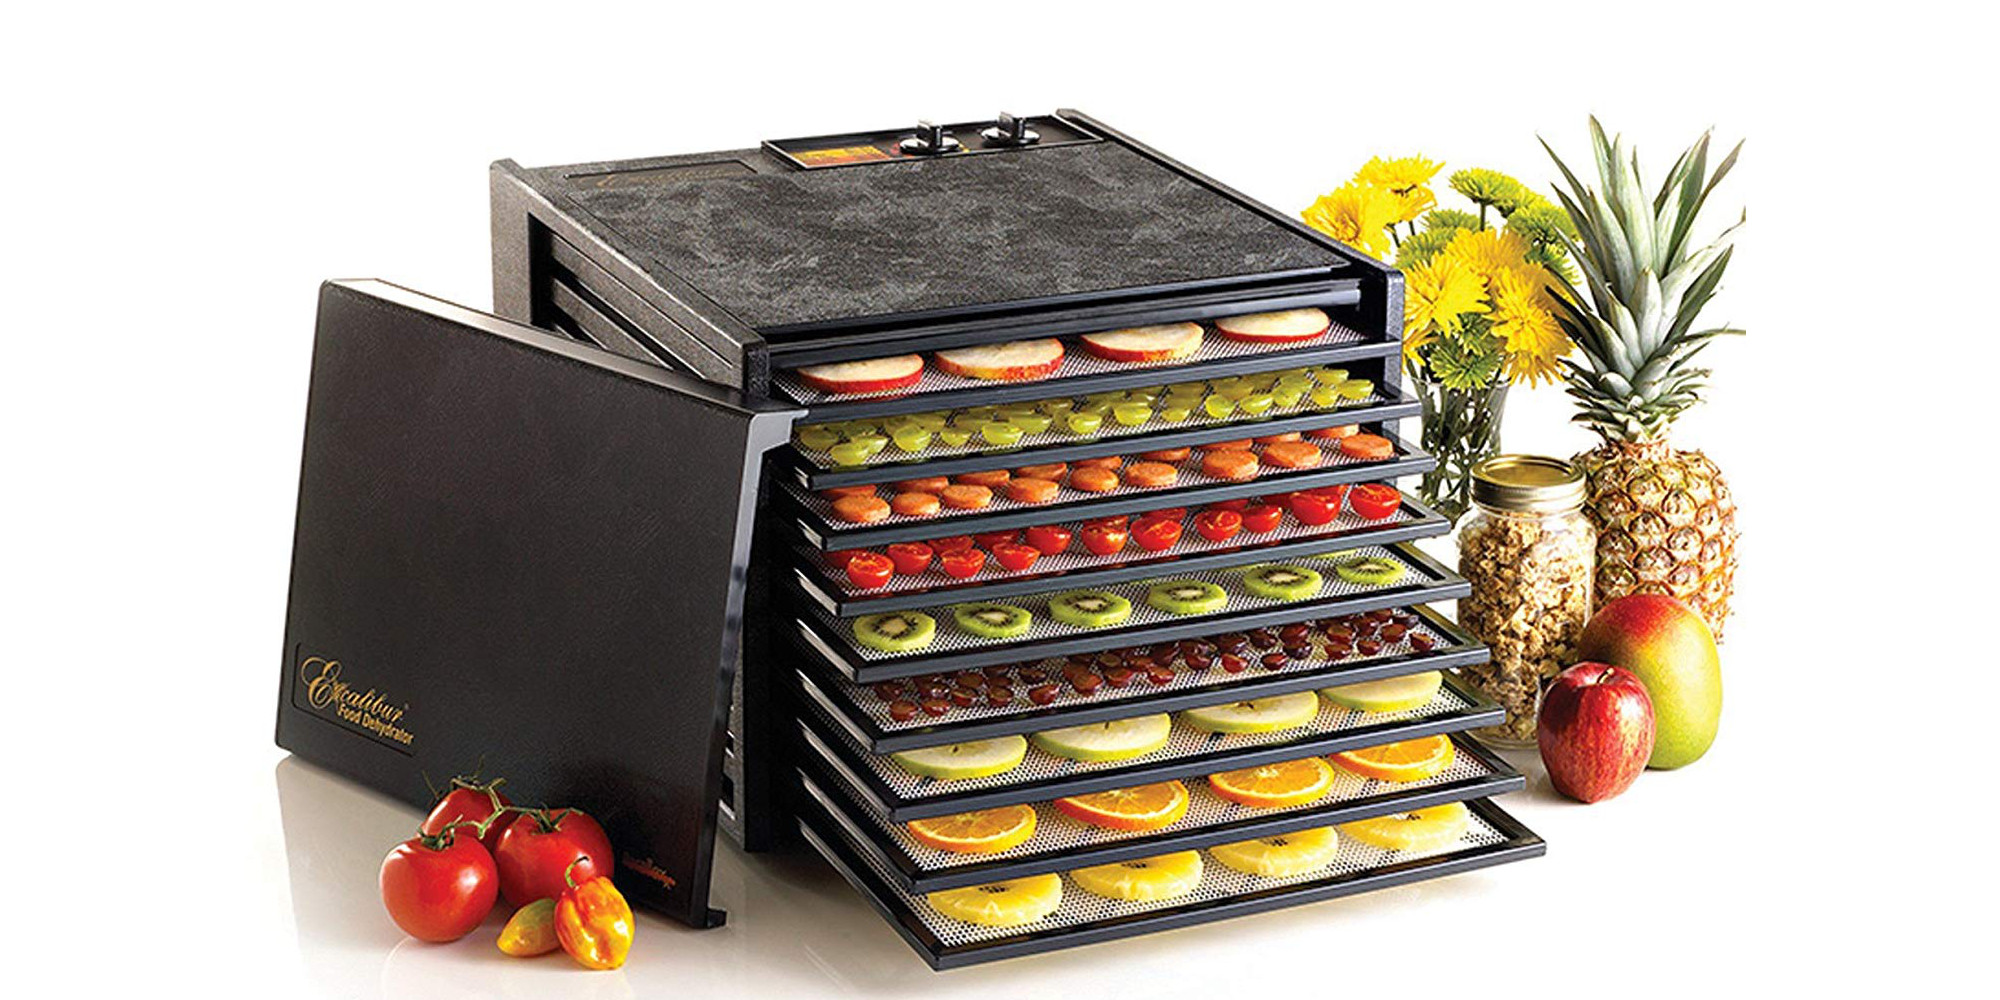 MAGIC MILL DEHYDRATOR - household items - by owner - housewares